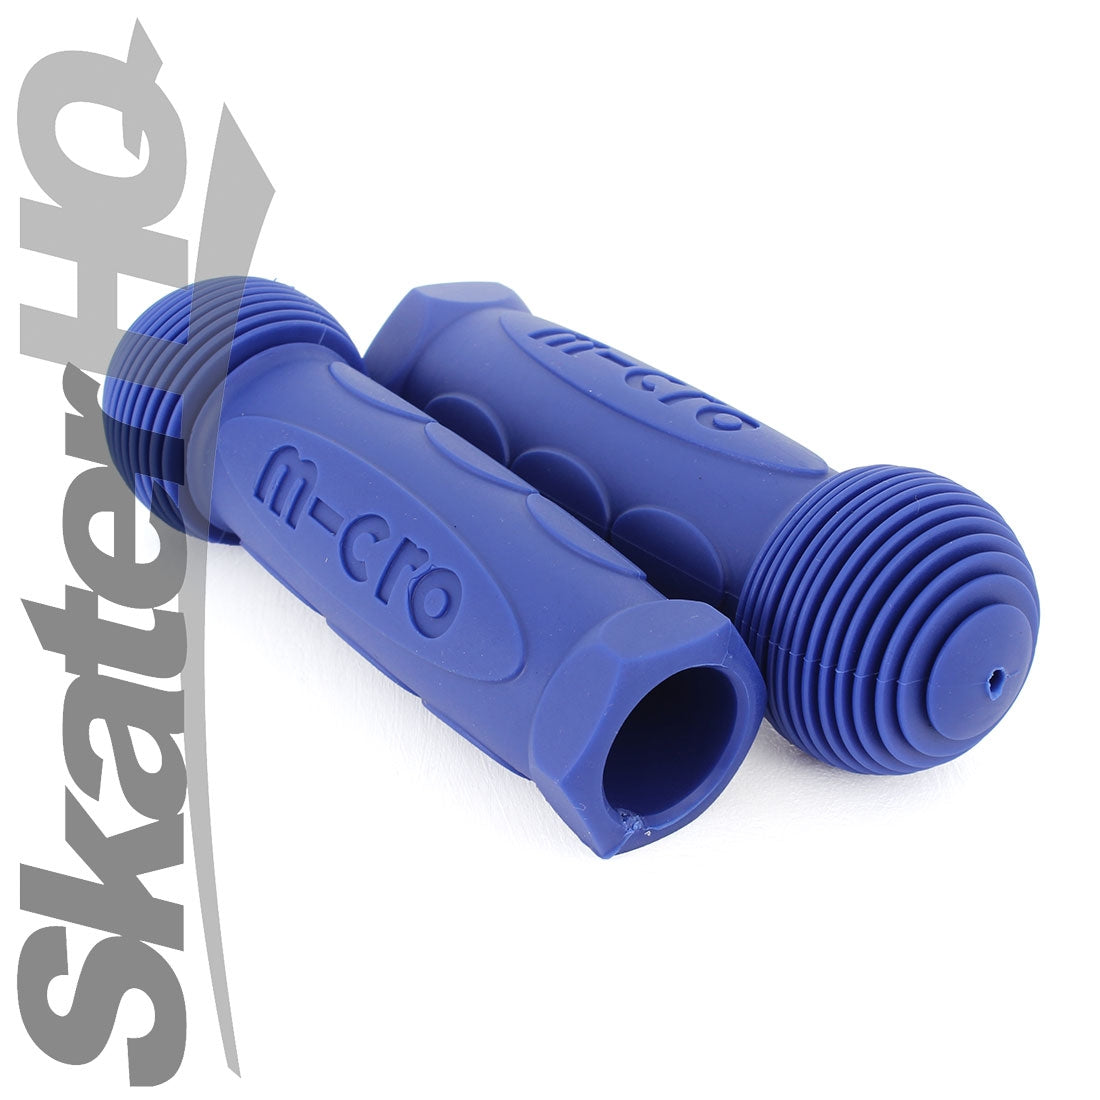 Micro Mini/Maxi 1414 Handle Grips - Cobalt Blue Scooter Grips